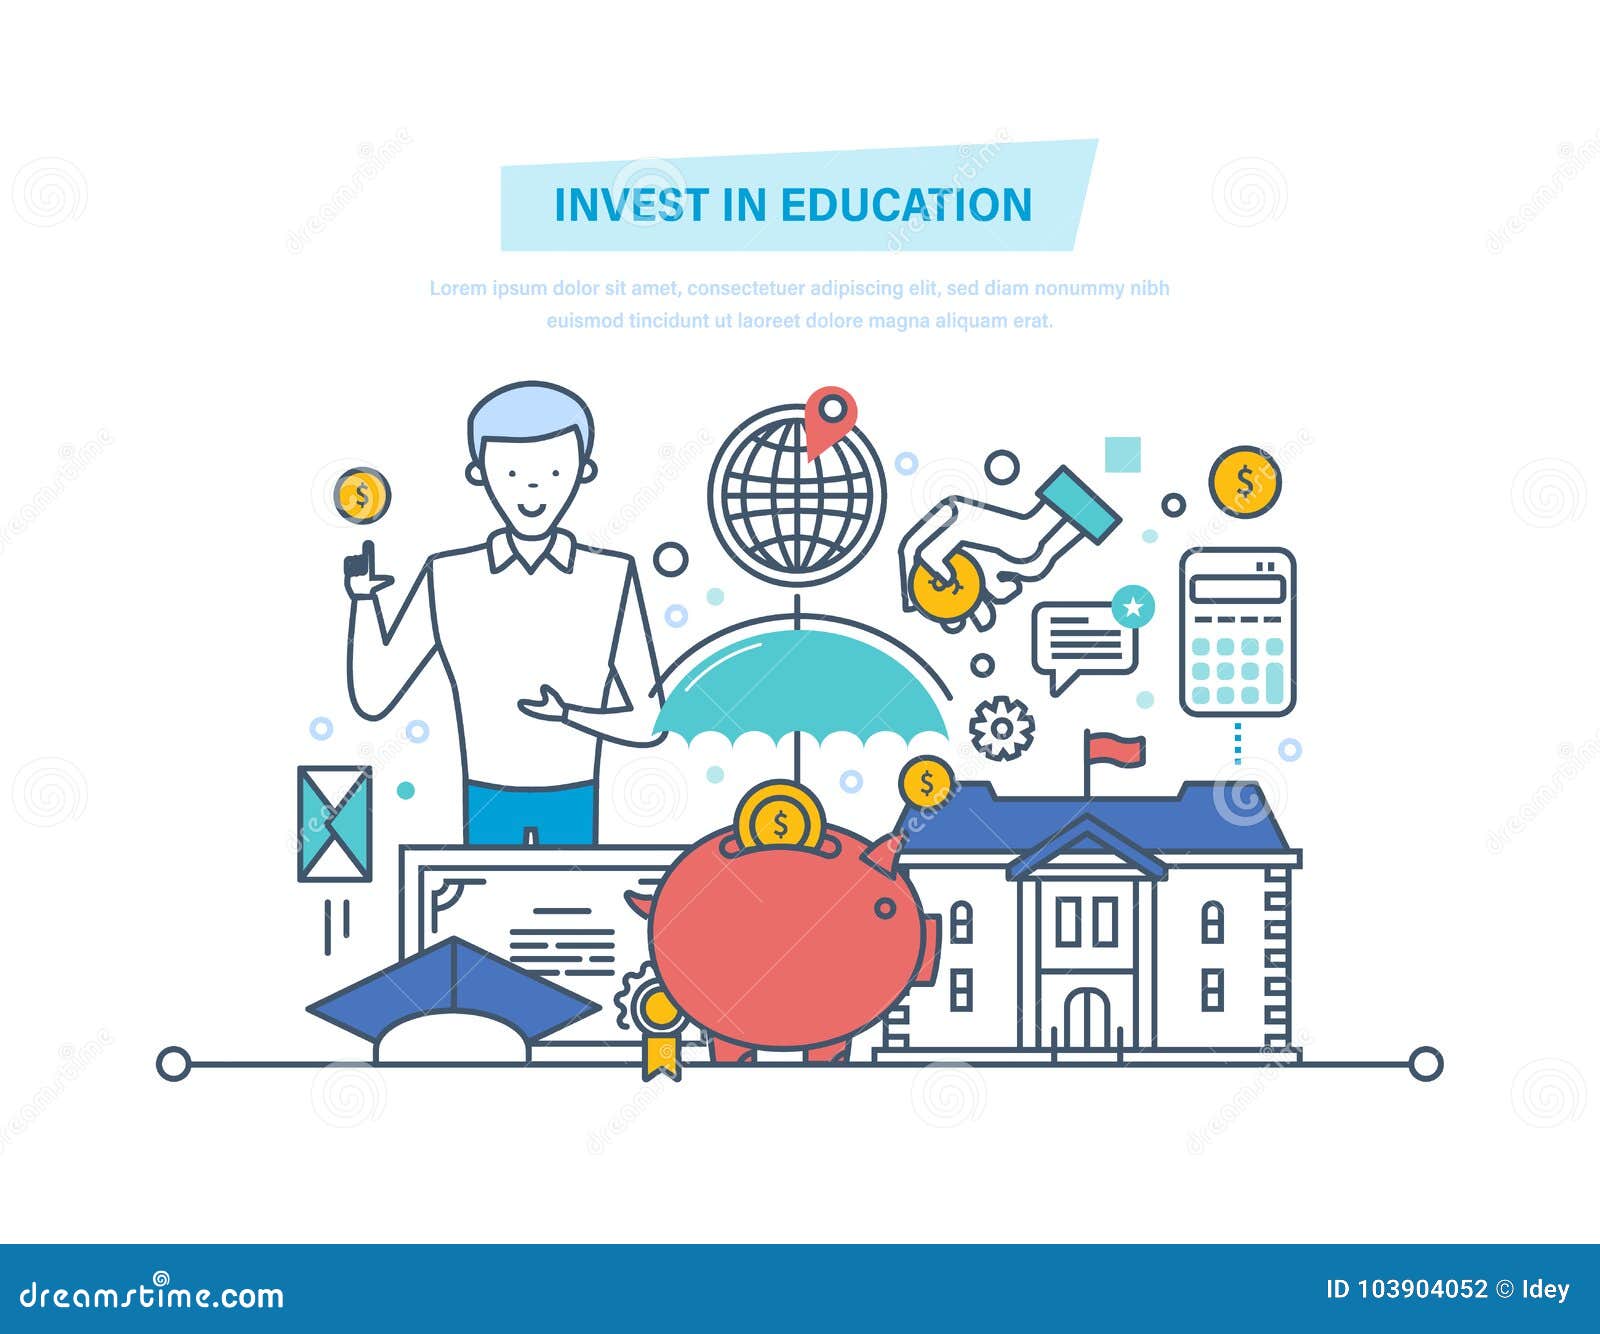 invest in education. financial investments in education, getting prestigious education.